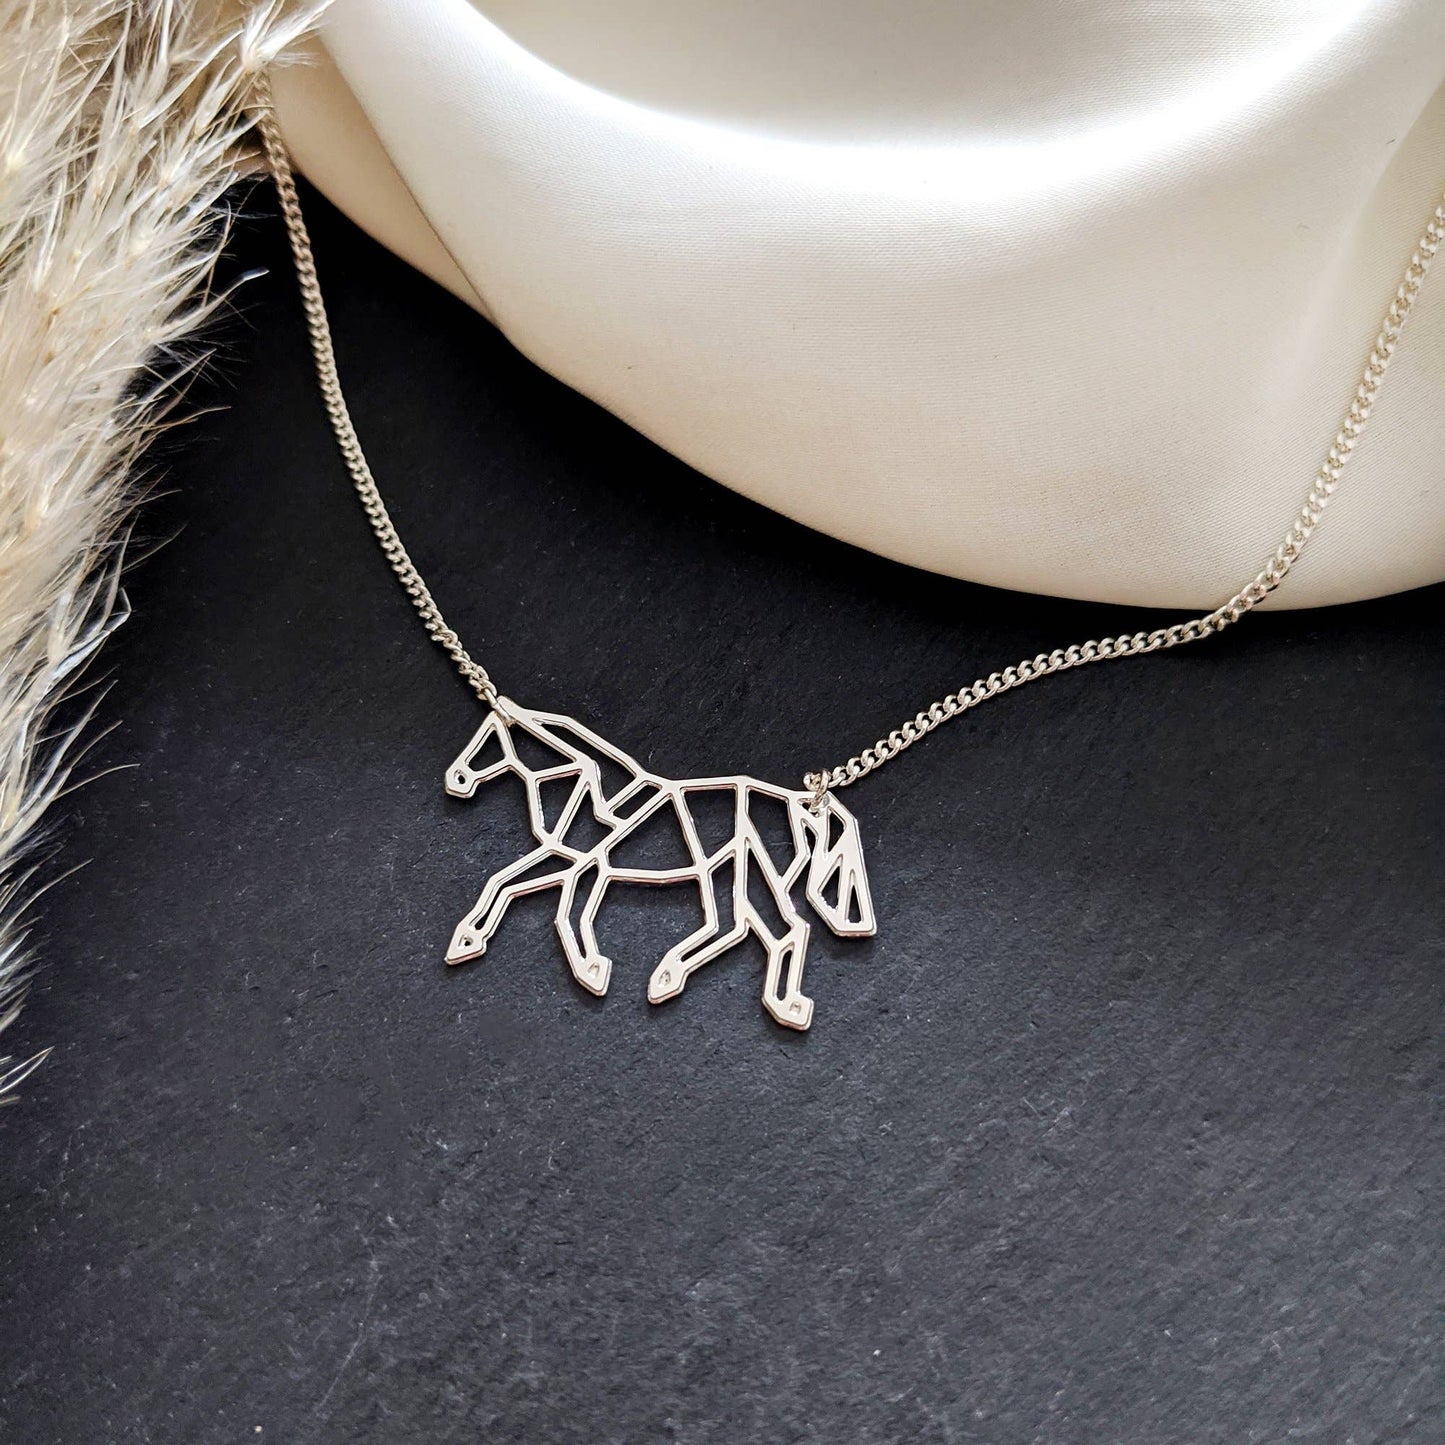 Origami Horse Necklace - Silver